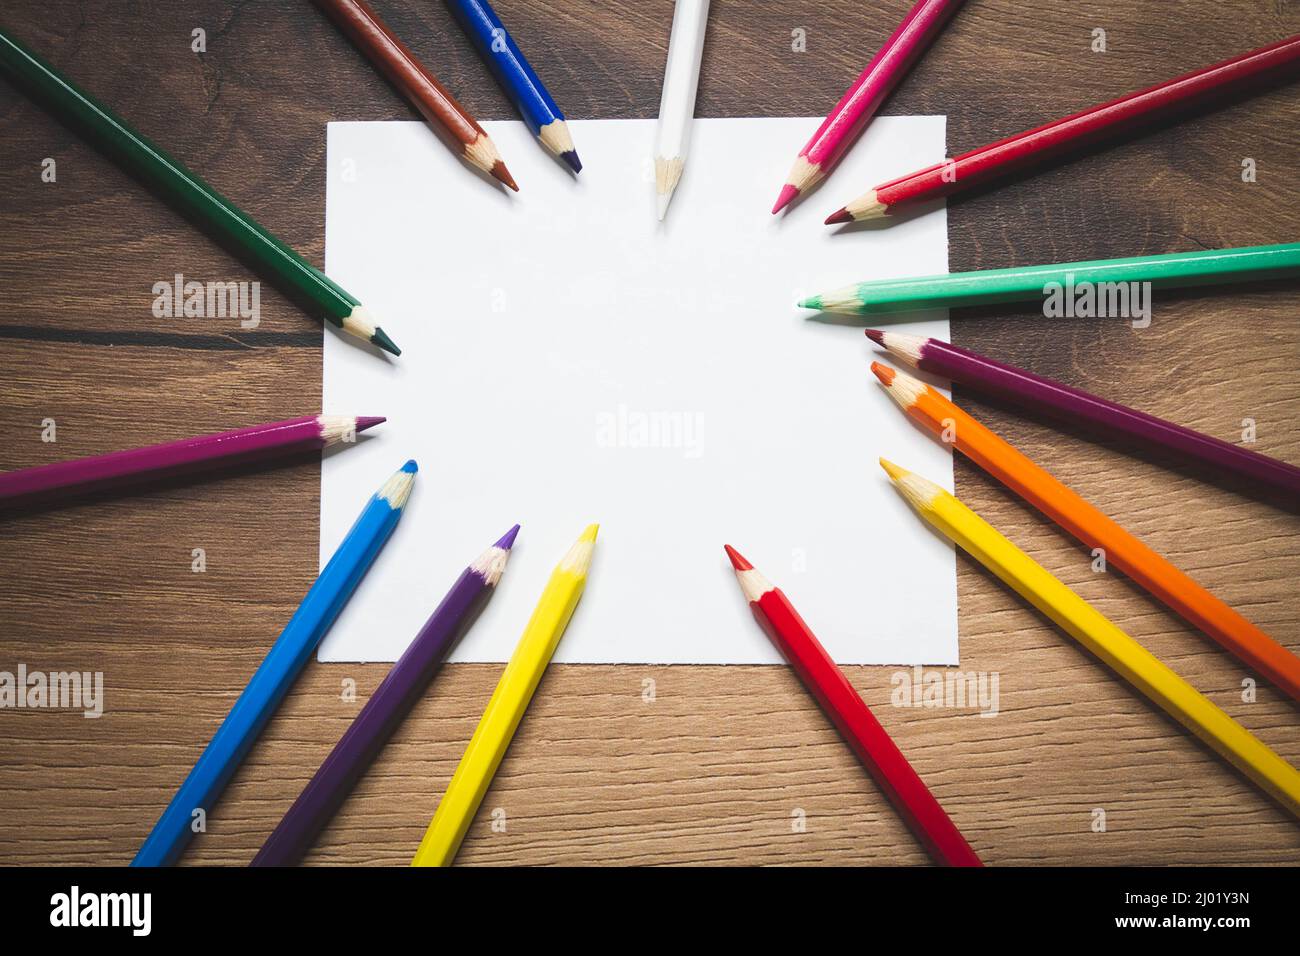 Color Pencils For Kids And Creativity Stock Illustration